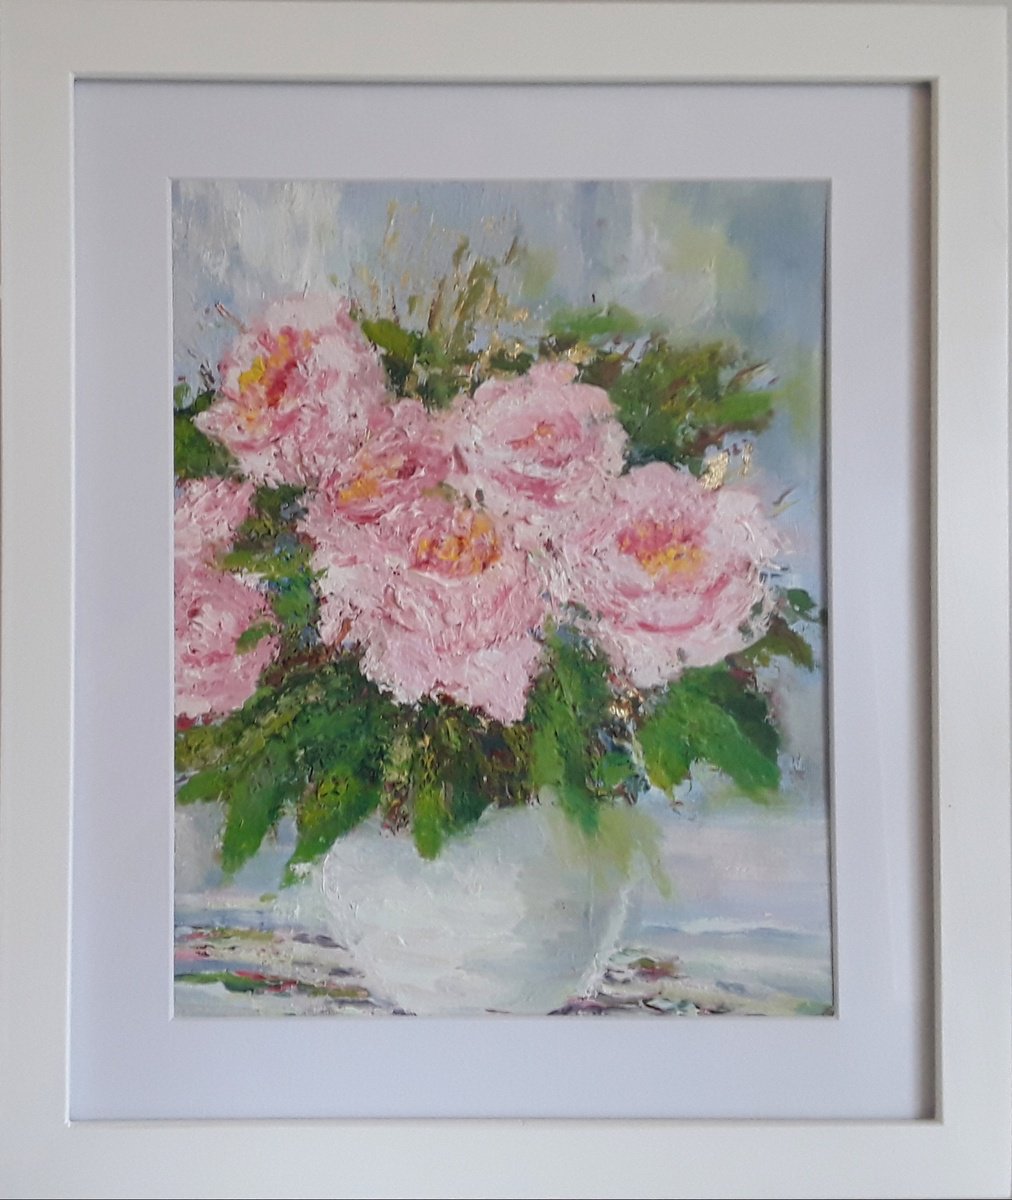 The Pink Rose’s by Therese O’Keeffe